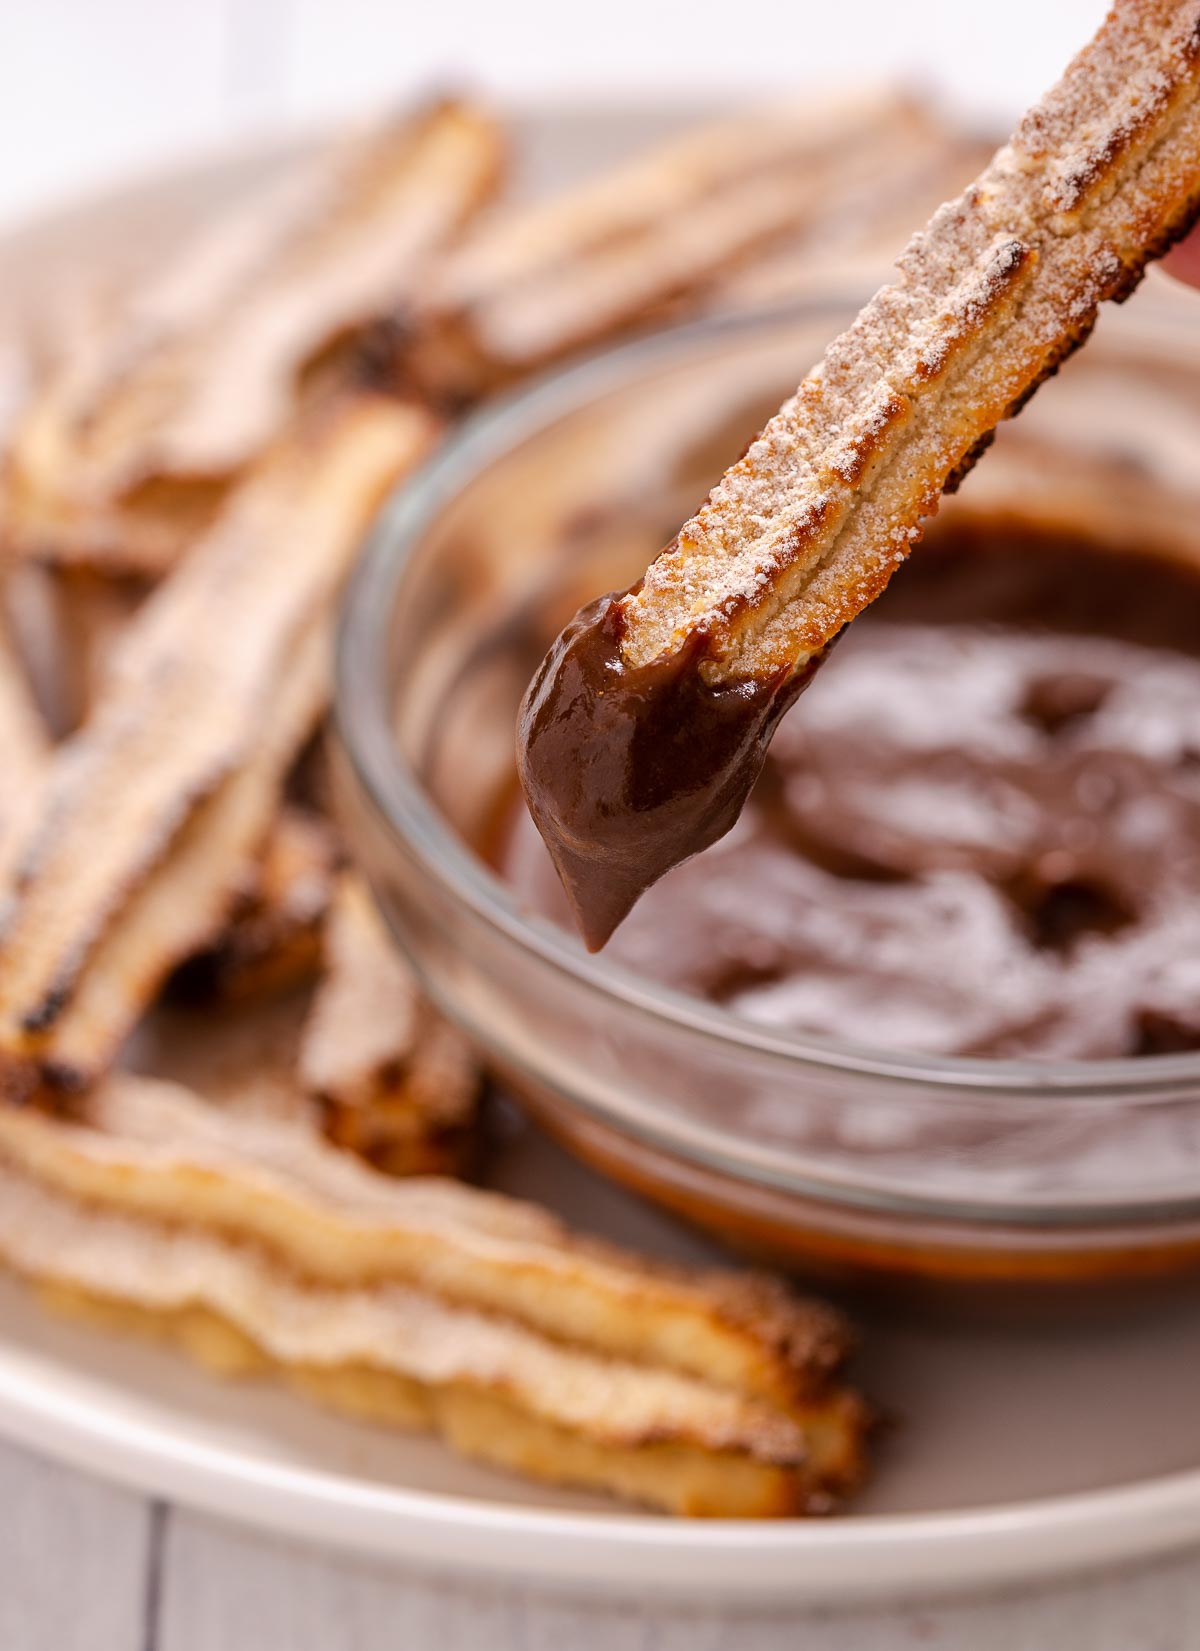 A plate of churros with one churro being dipped into a small bowl of melted chocolate.